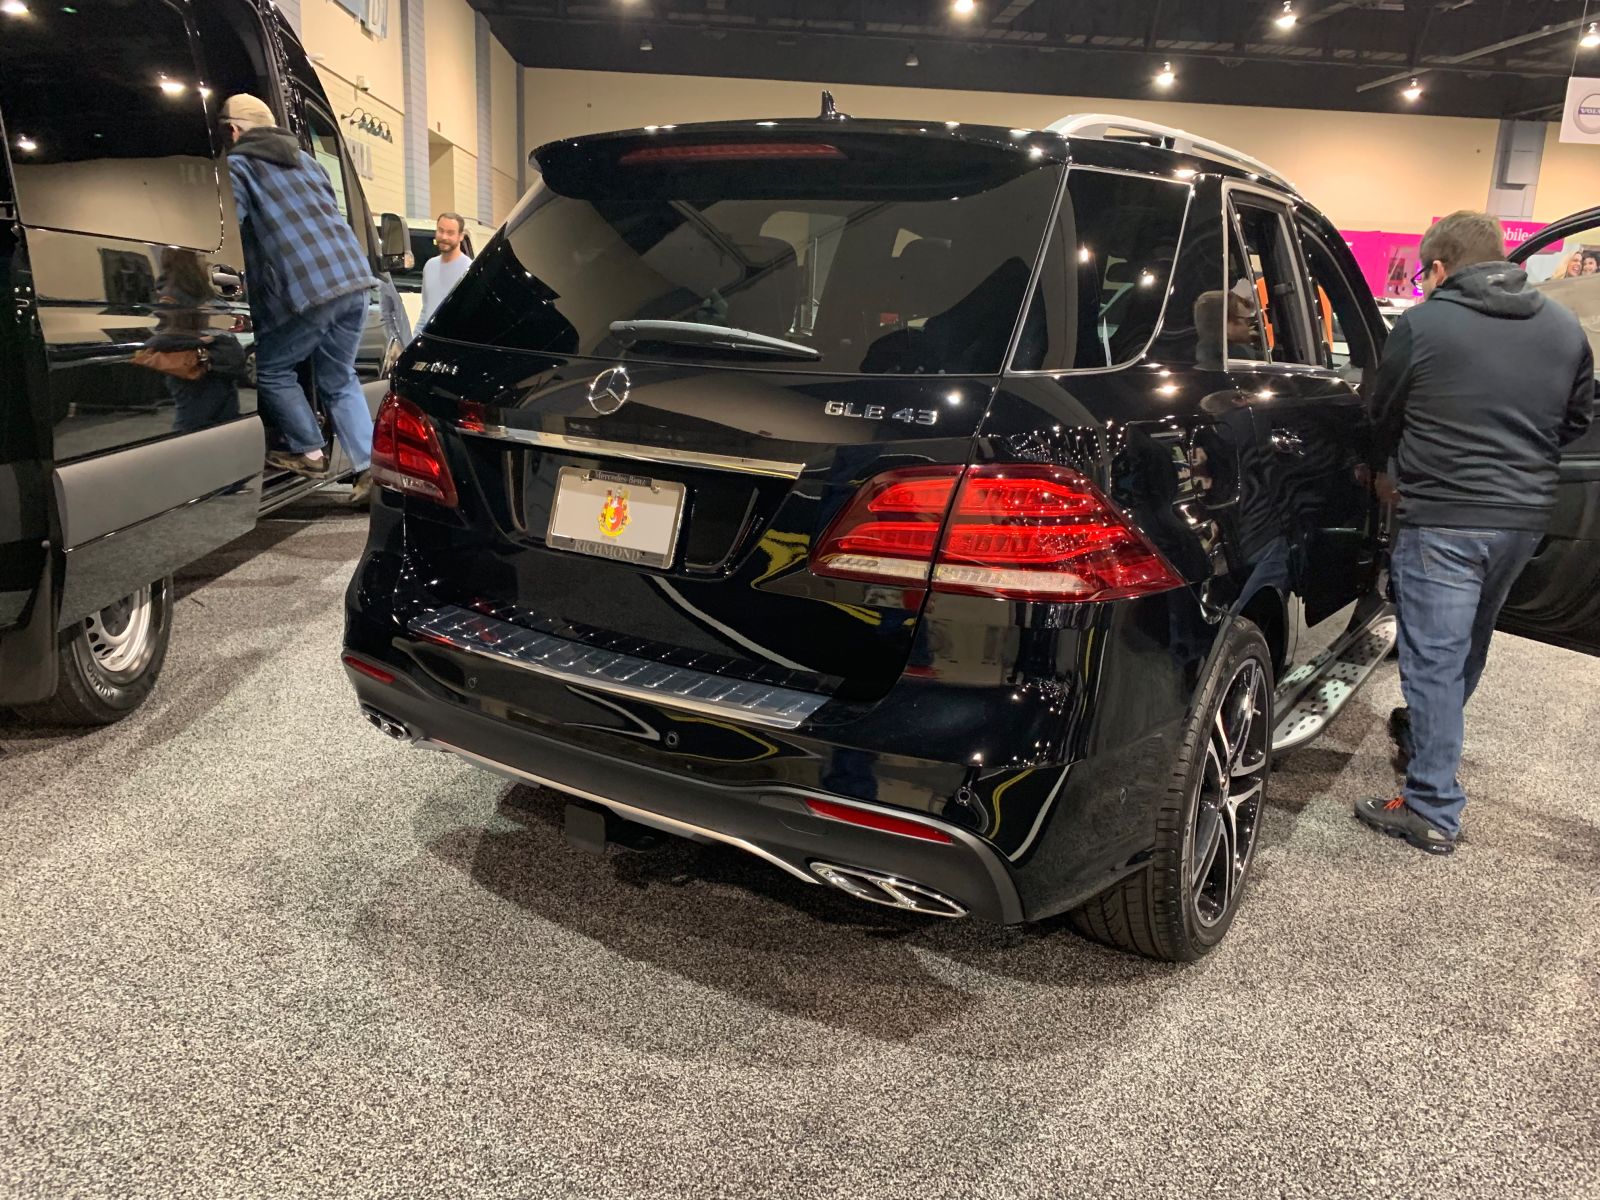 The only AMG at the show